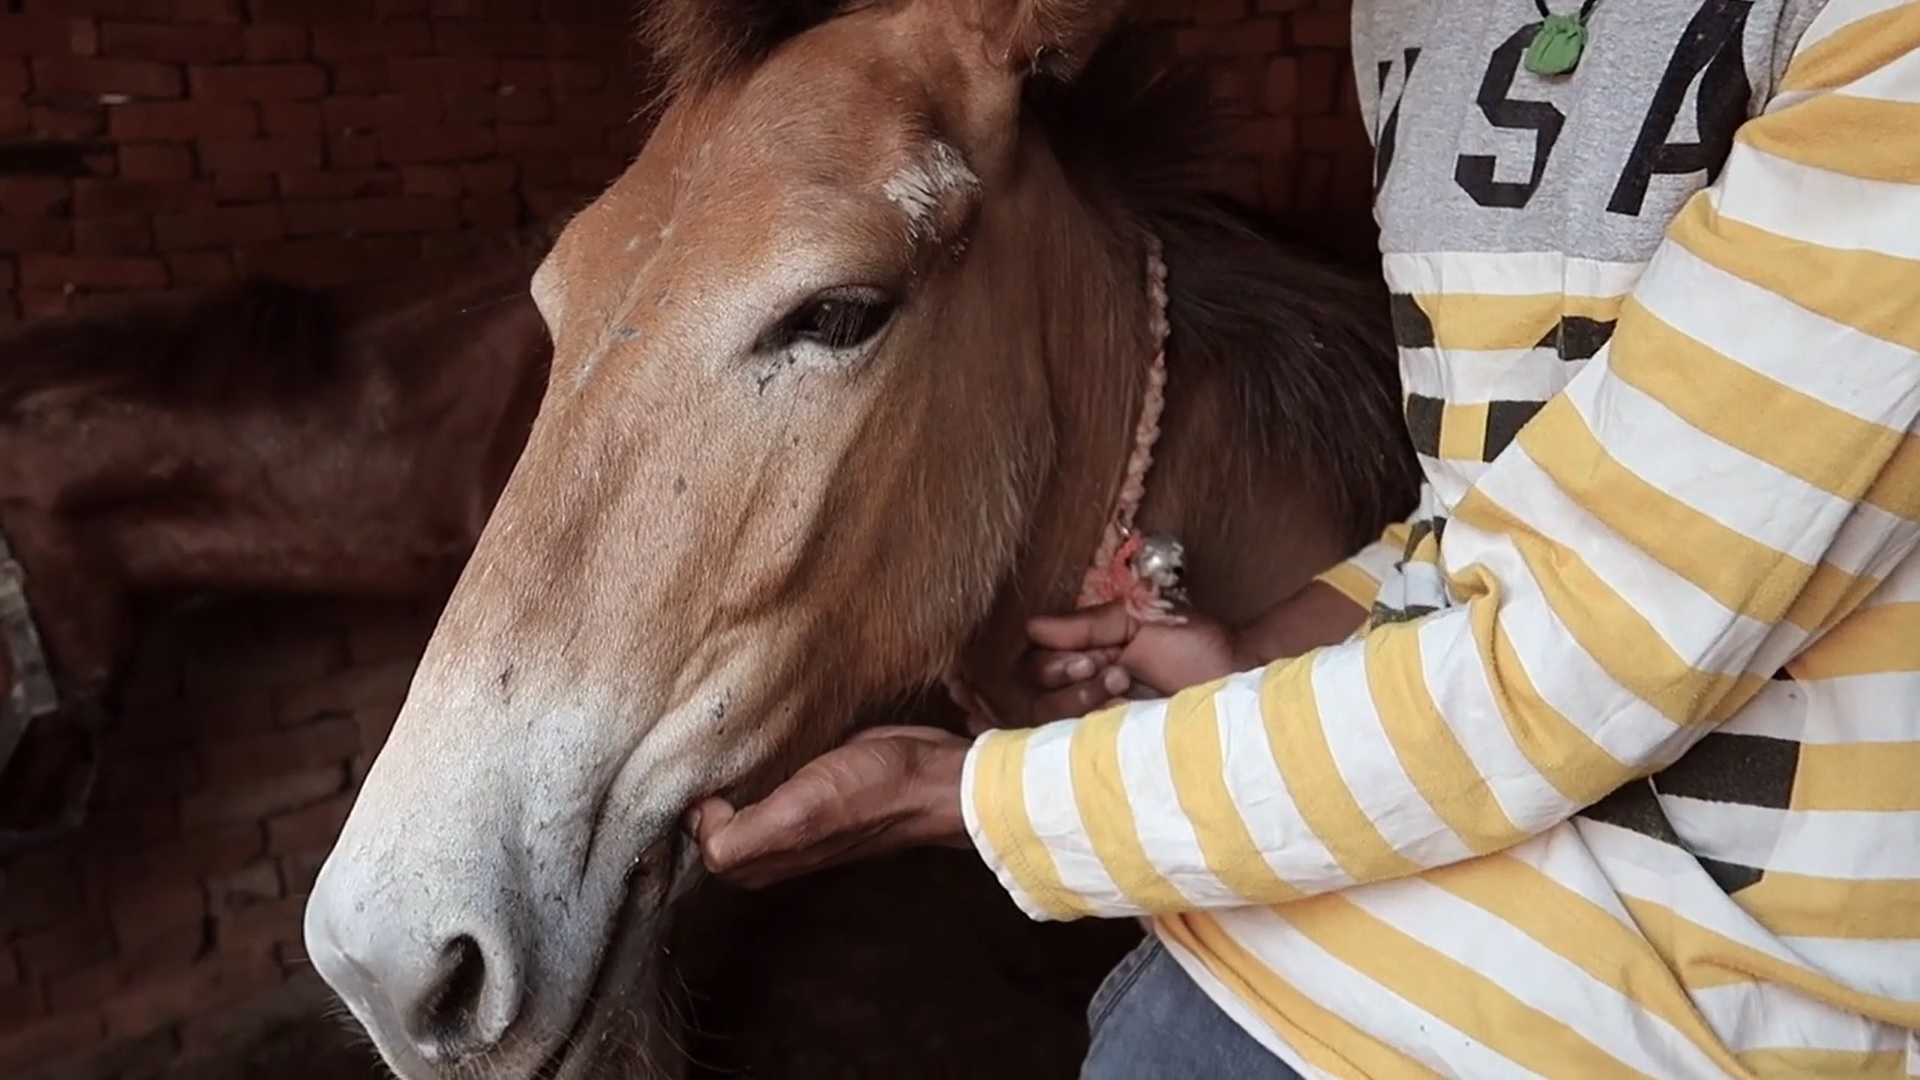 A mule and a person hands grabing its head and neck